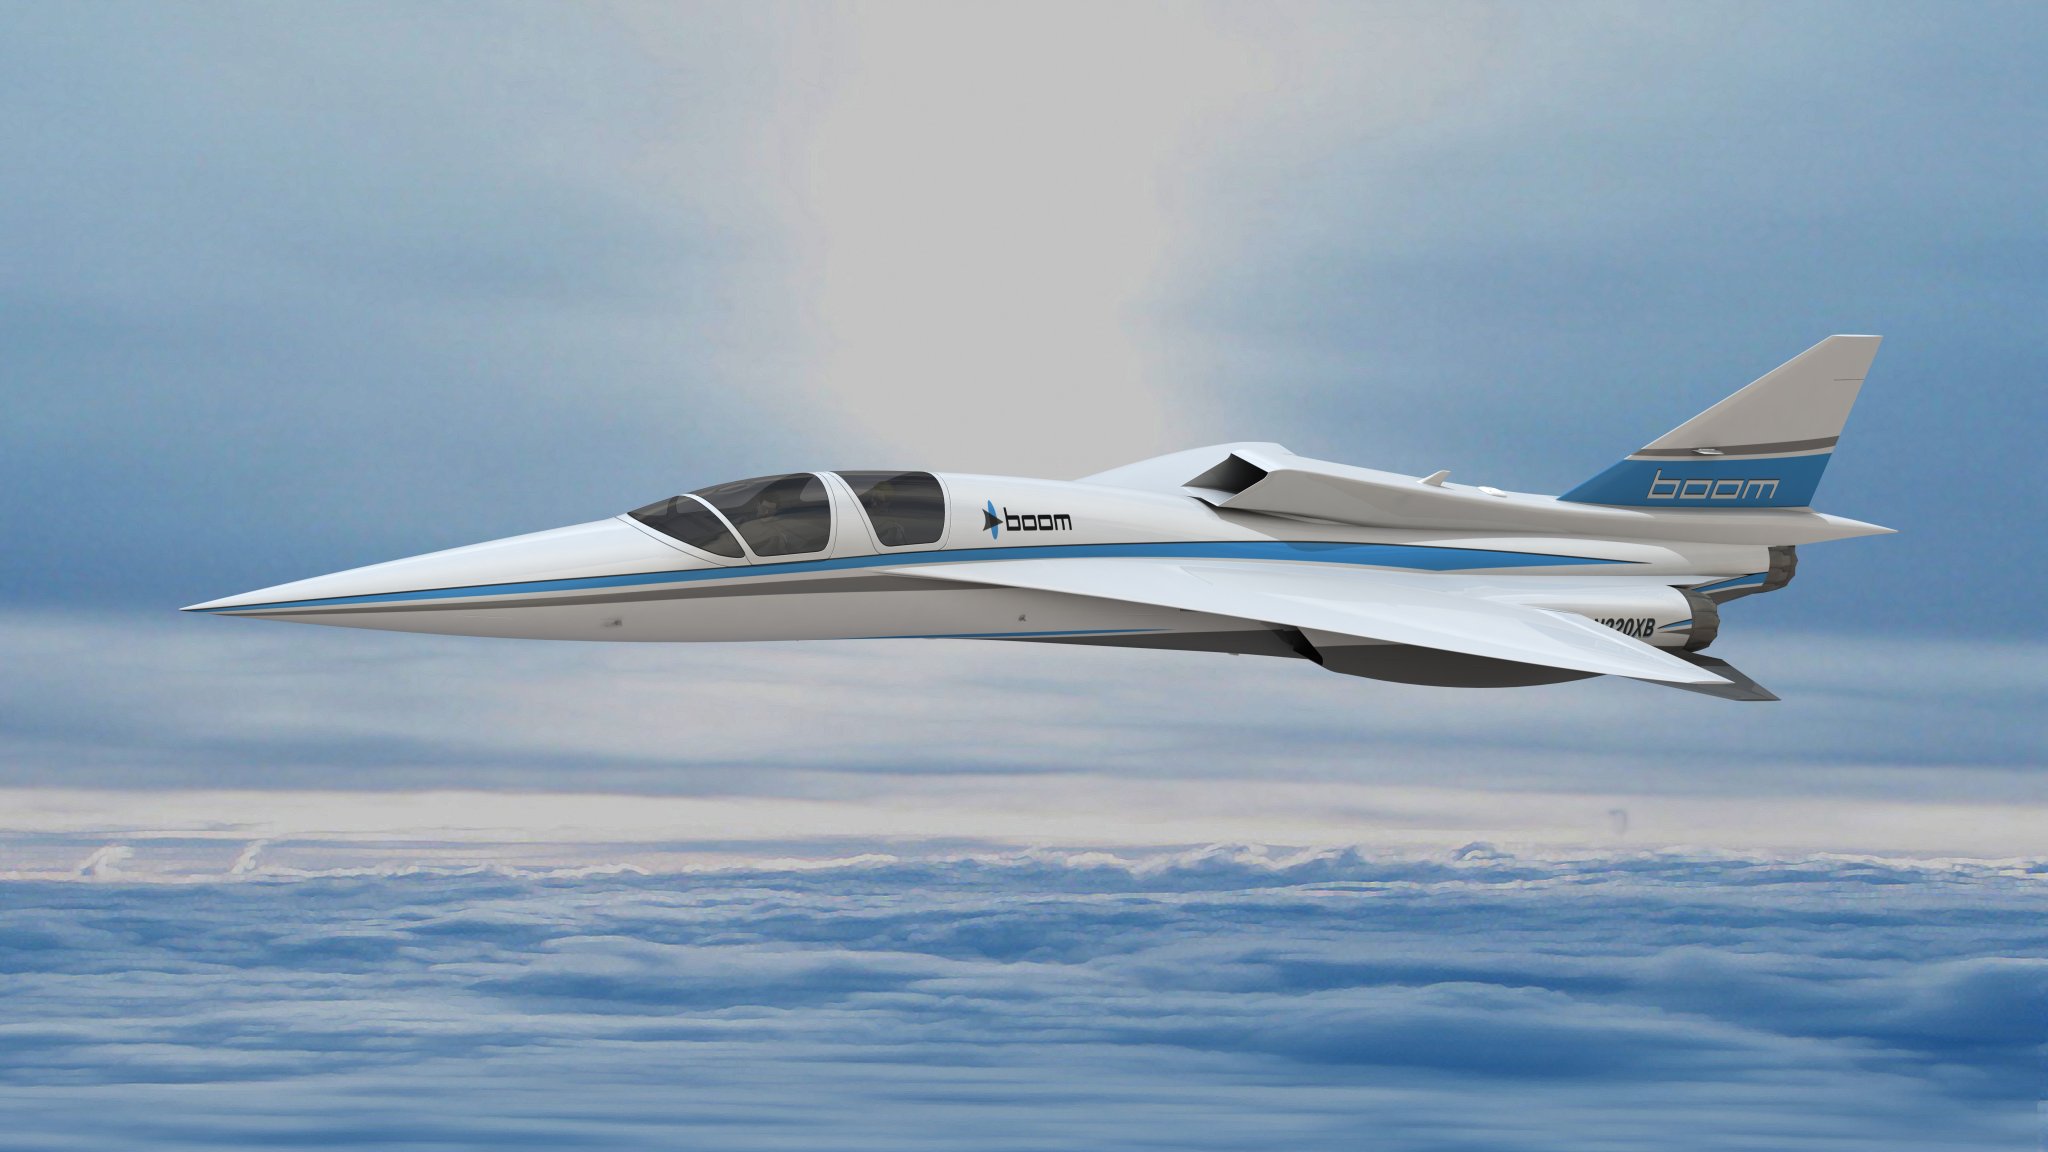 New Supersonic Jets Could Be Good for Travelers, Bad for Environment